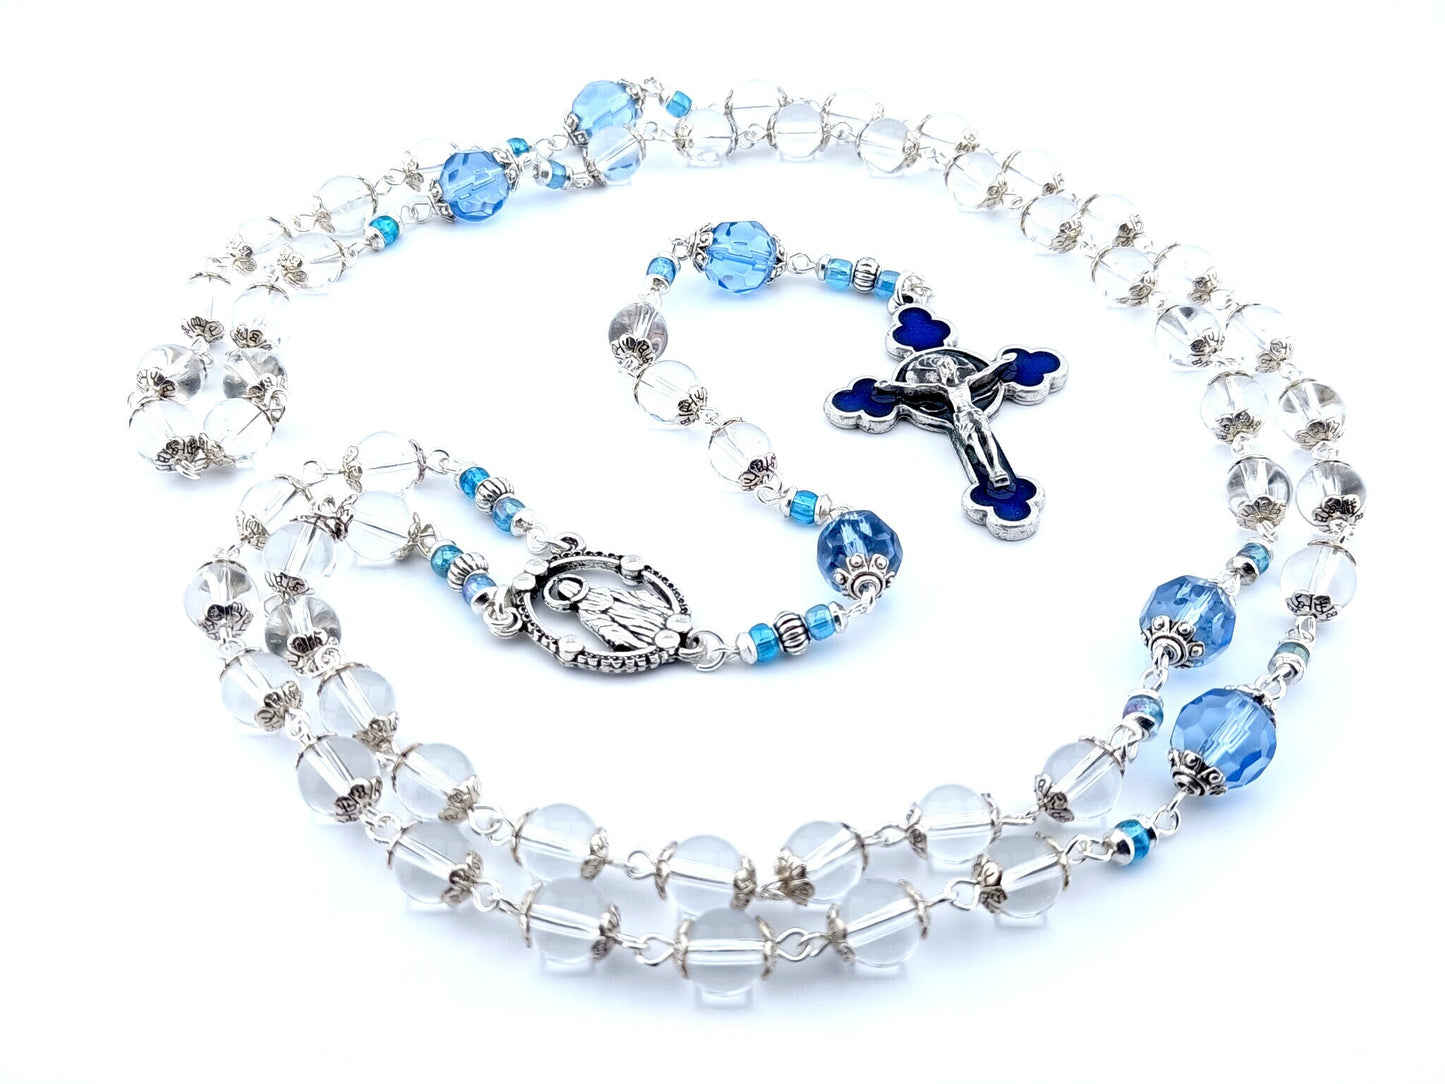 Our Lady of Grace unique rosary beads with clear glass beads, faceted blue glass pater beads, blue enamel crucifix and silver centre medal.